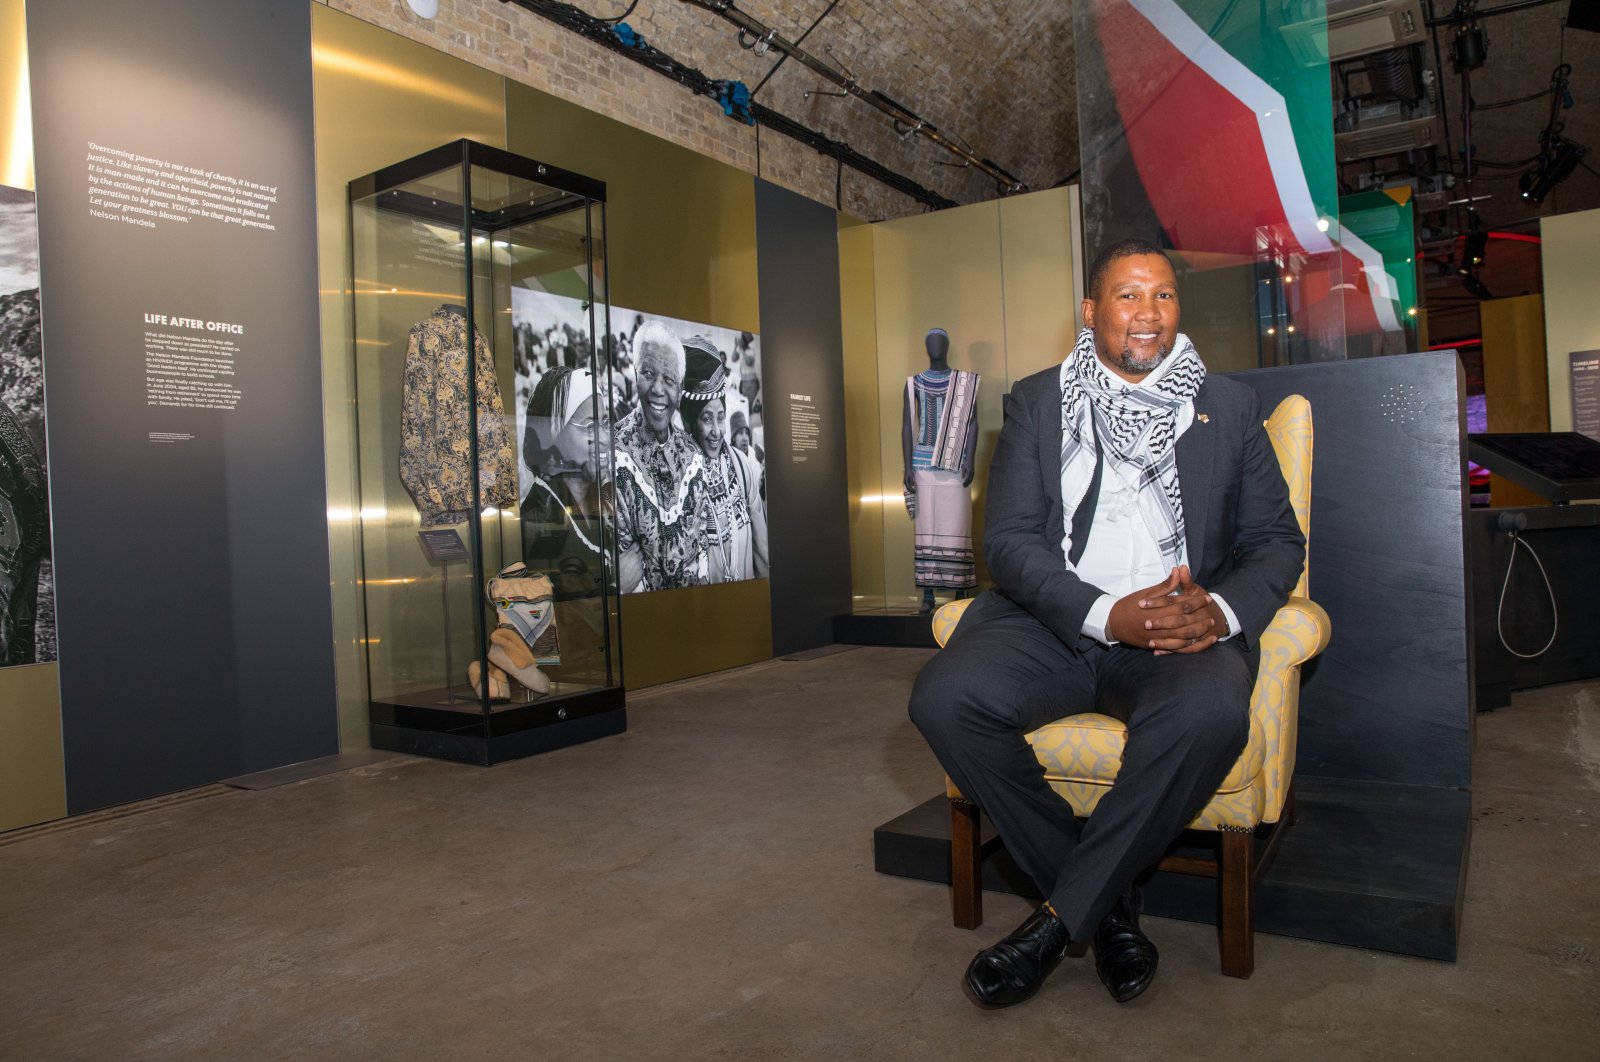 This file photo shows Chief Zwelivelile "Mandla” Mandela at the "Mandela: The Official Exhibition" in London, U.K., Feb. 07, 2019 (Reuters Photo)